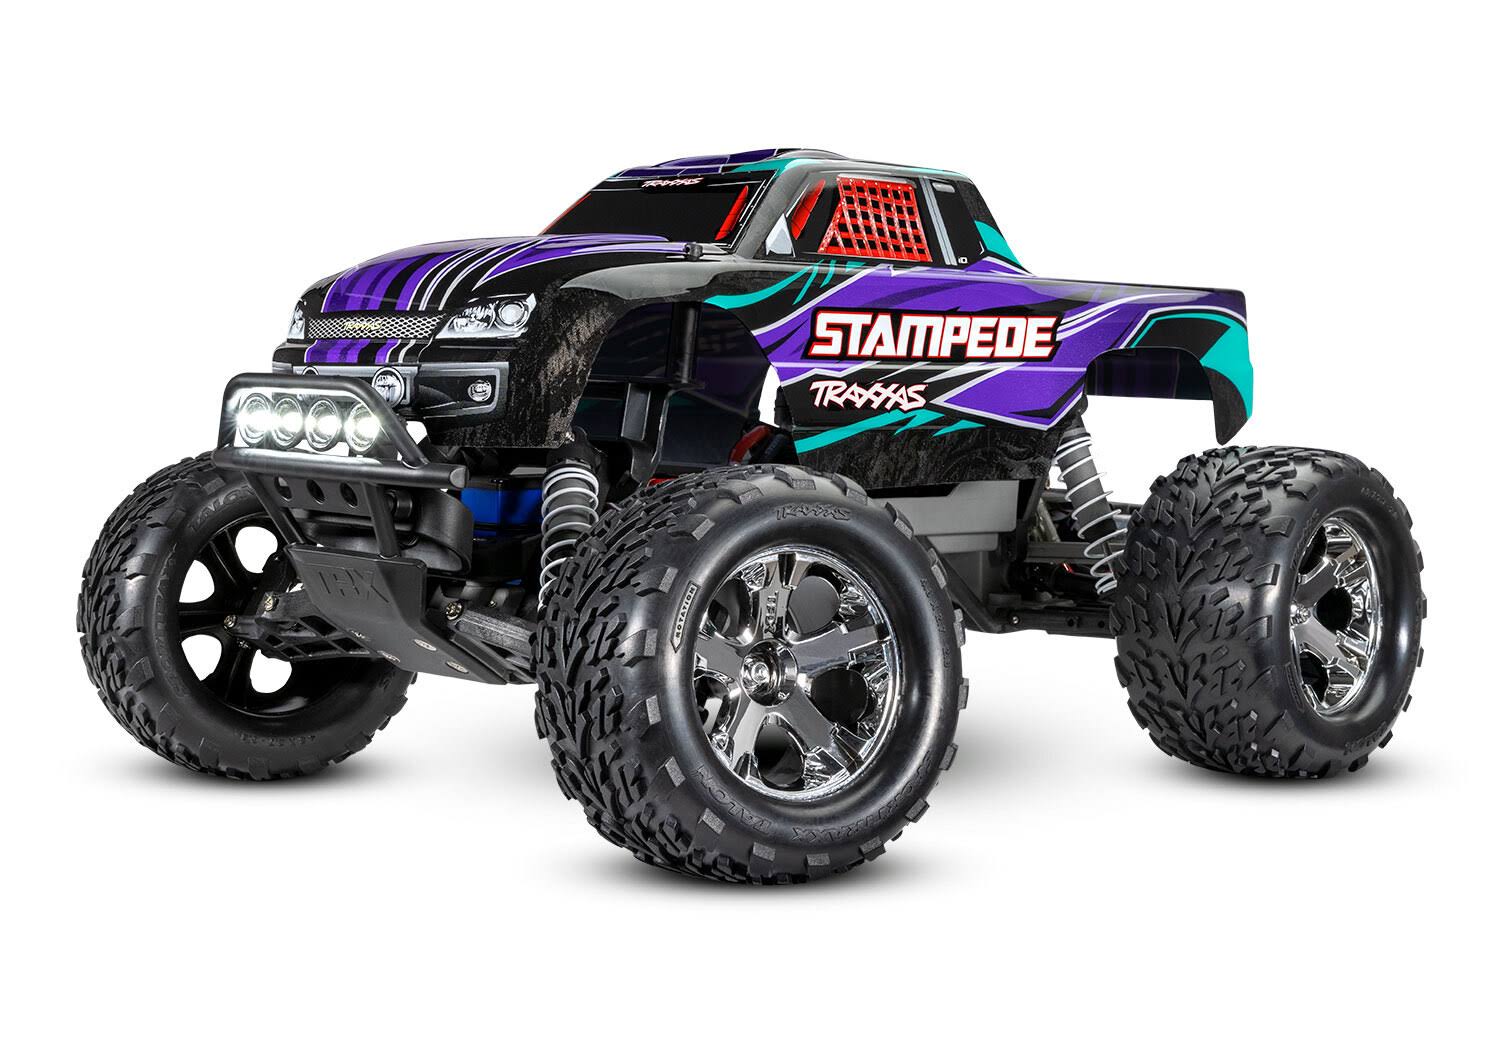 Traxxas Stampede 1/10 XL-5 2WD RC Monster Truck with LED Lighting Purple 36054-61 - Default Title